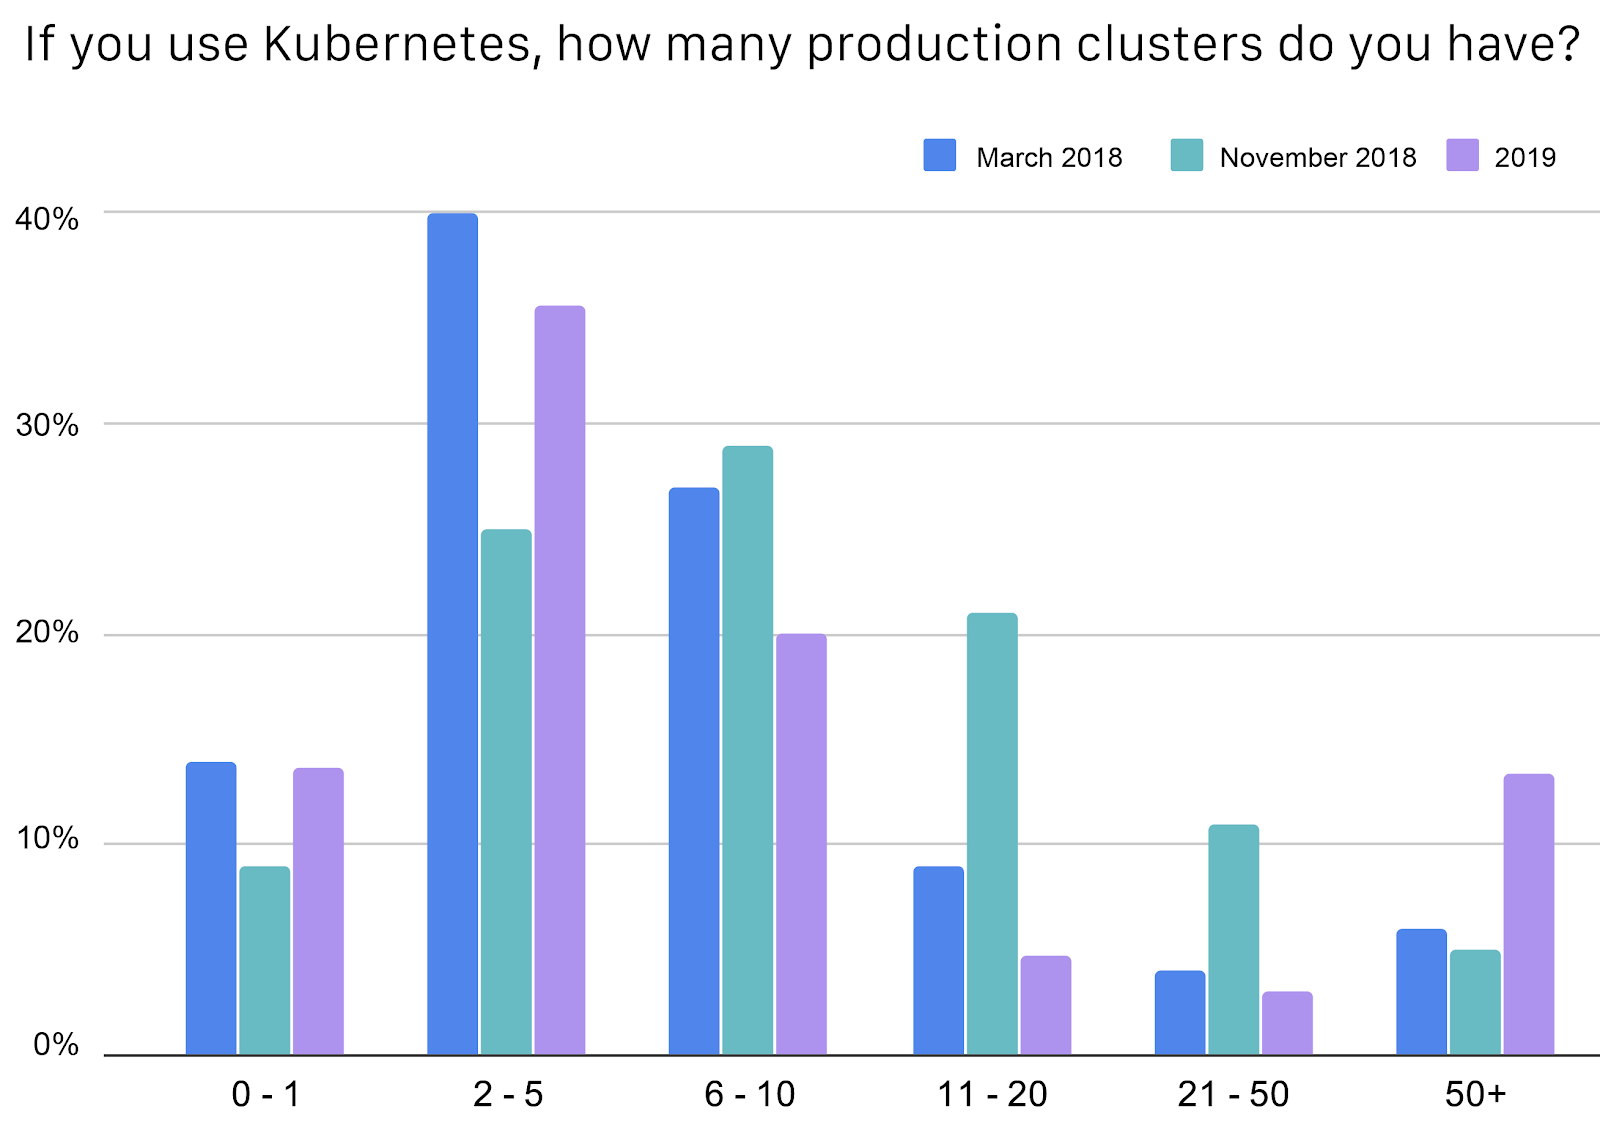 Bar chart showing most of Kubernetes users have 2-5 production clusters